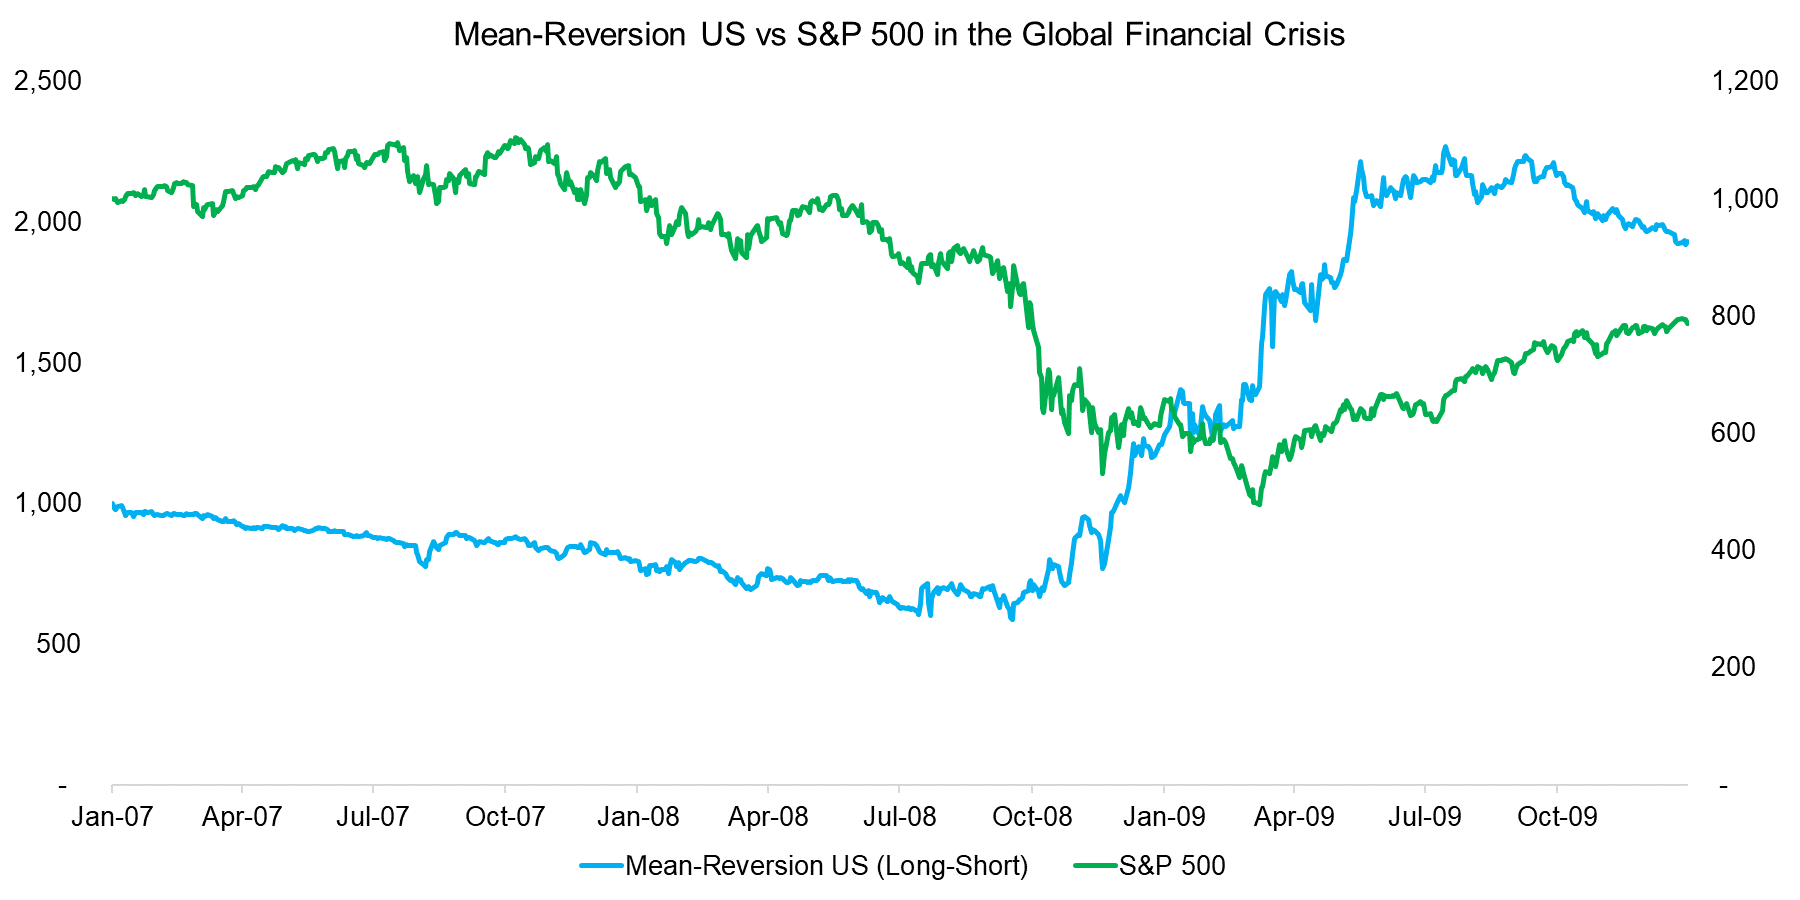 Mean-Reversion US vs S&P 500 in the Global Financial Crisis